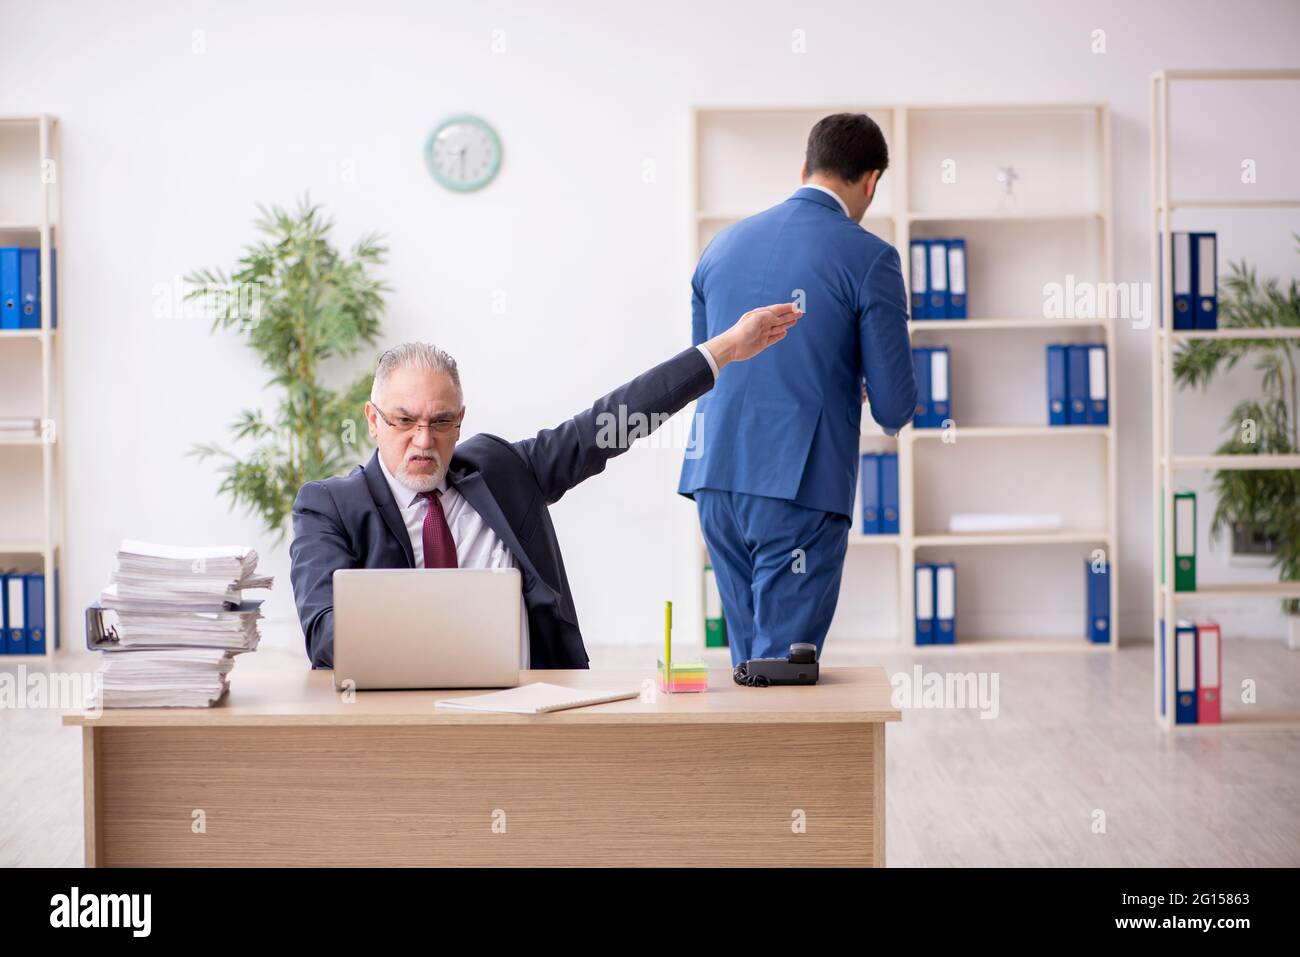 Two employees in unemployment concept Stock Photo